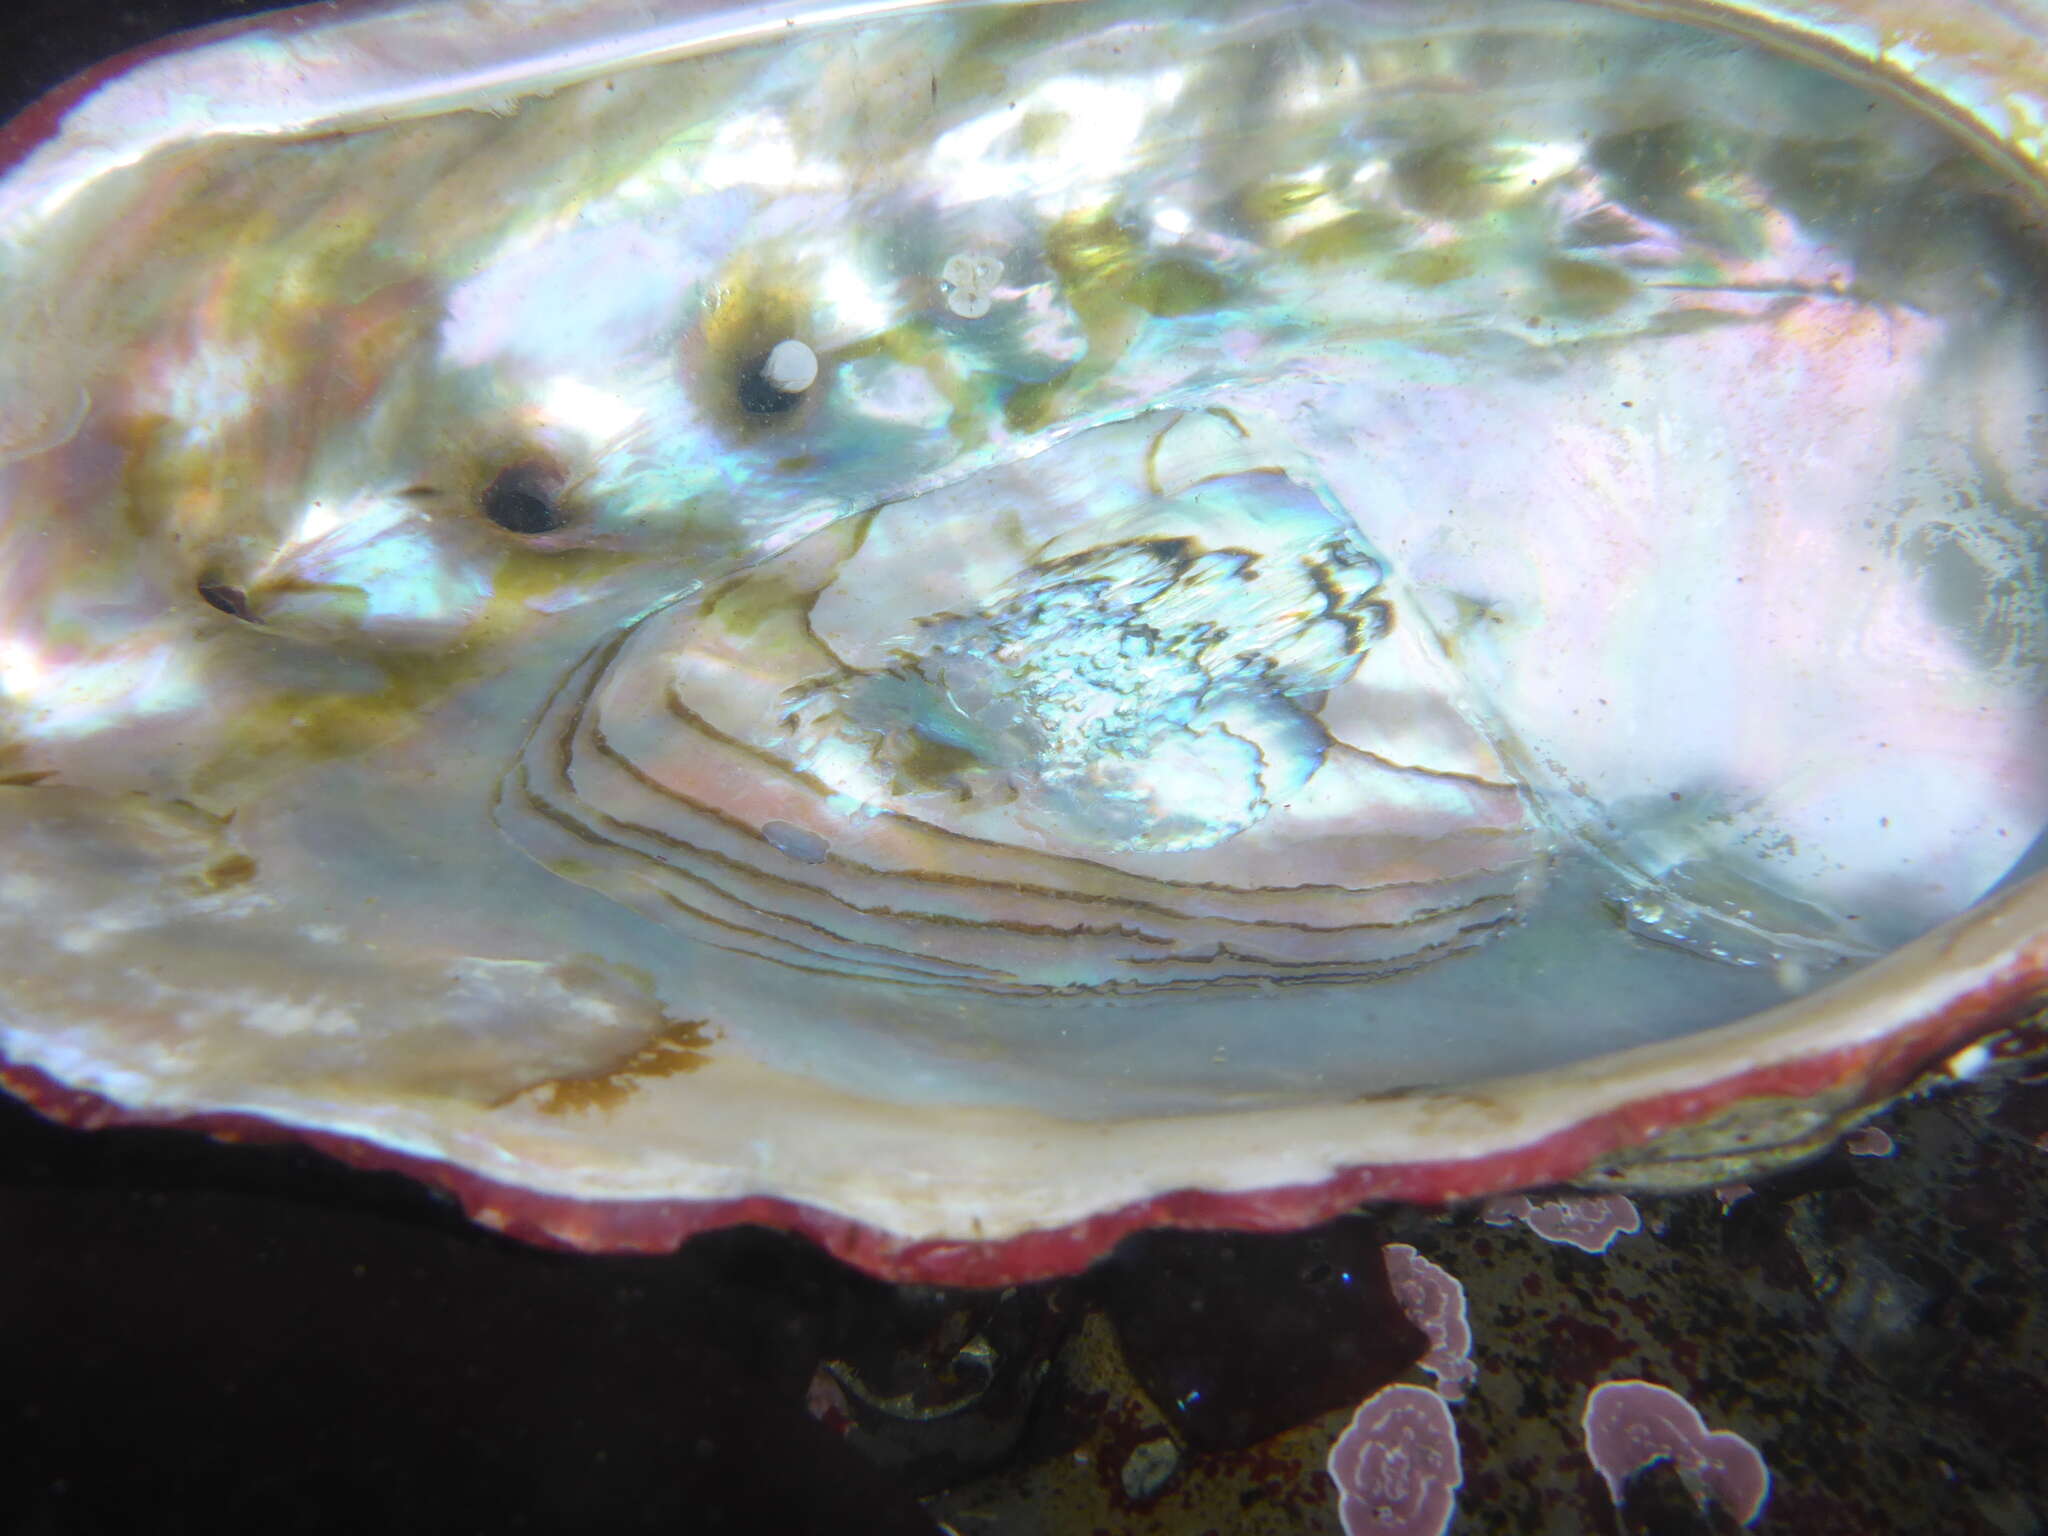 Image of red abalone